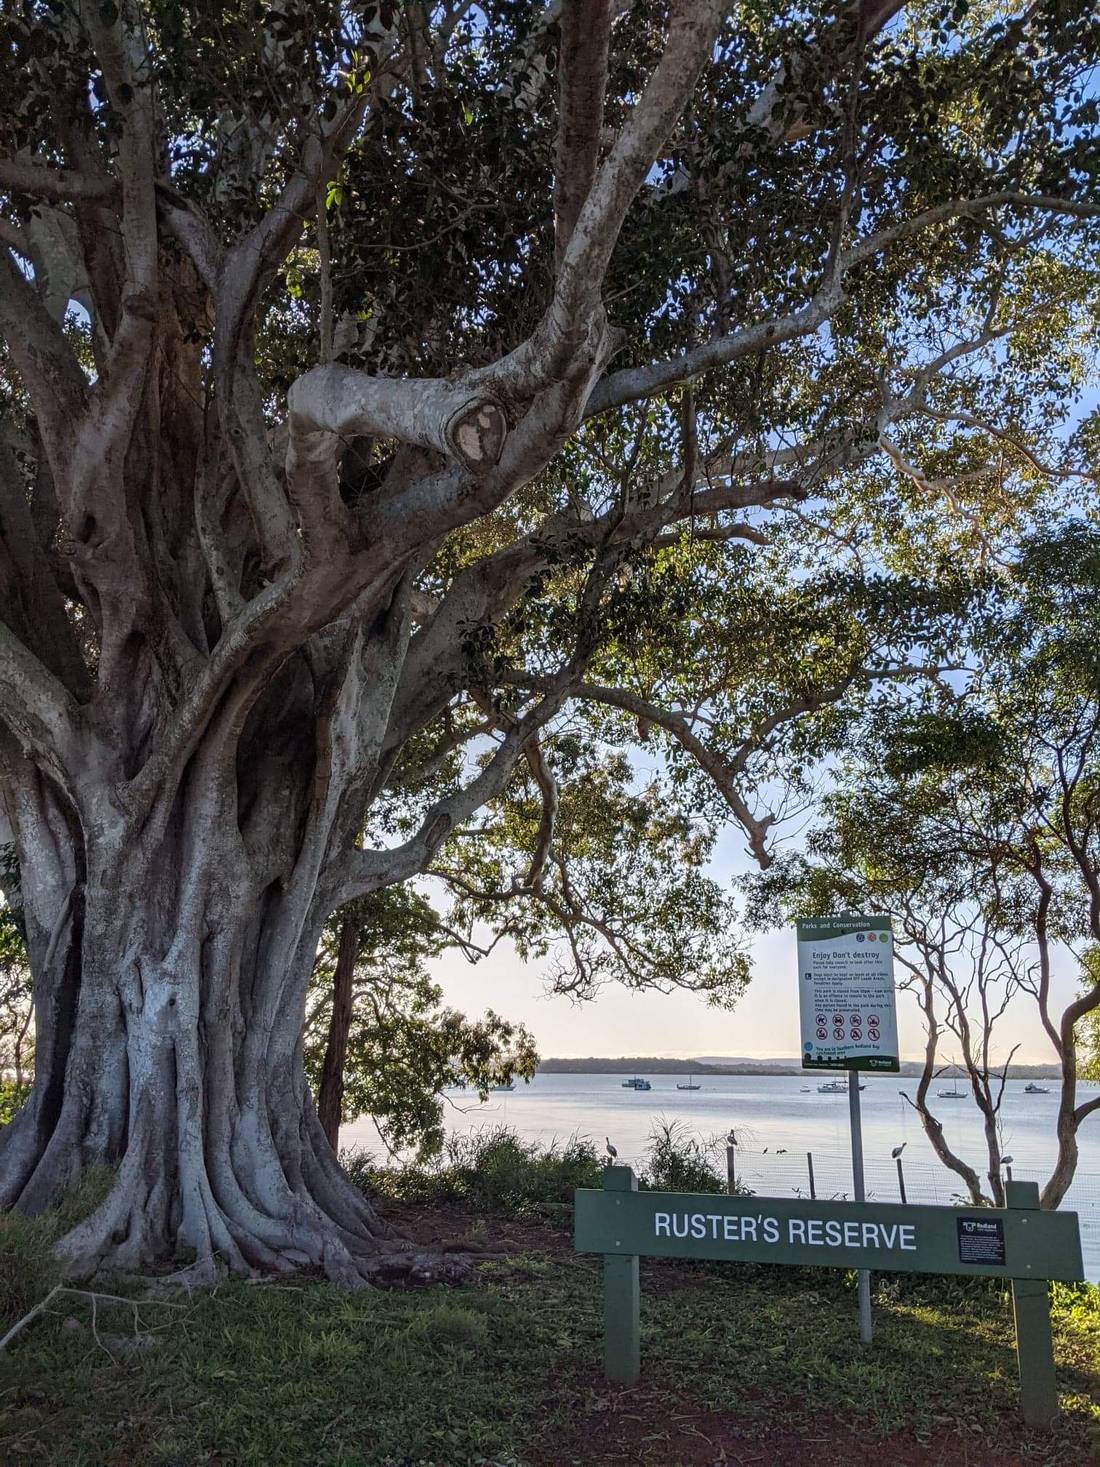 No trip to Redland Bay is complete with out a visit to Ruster’s Reserve a netted swimming spot and the big old Fig tree.